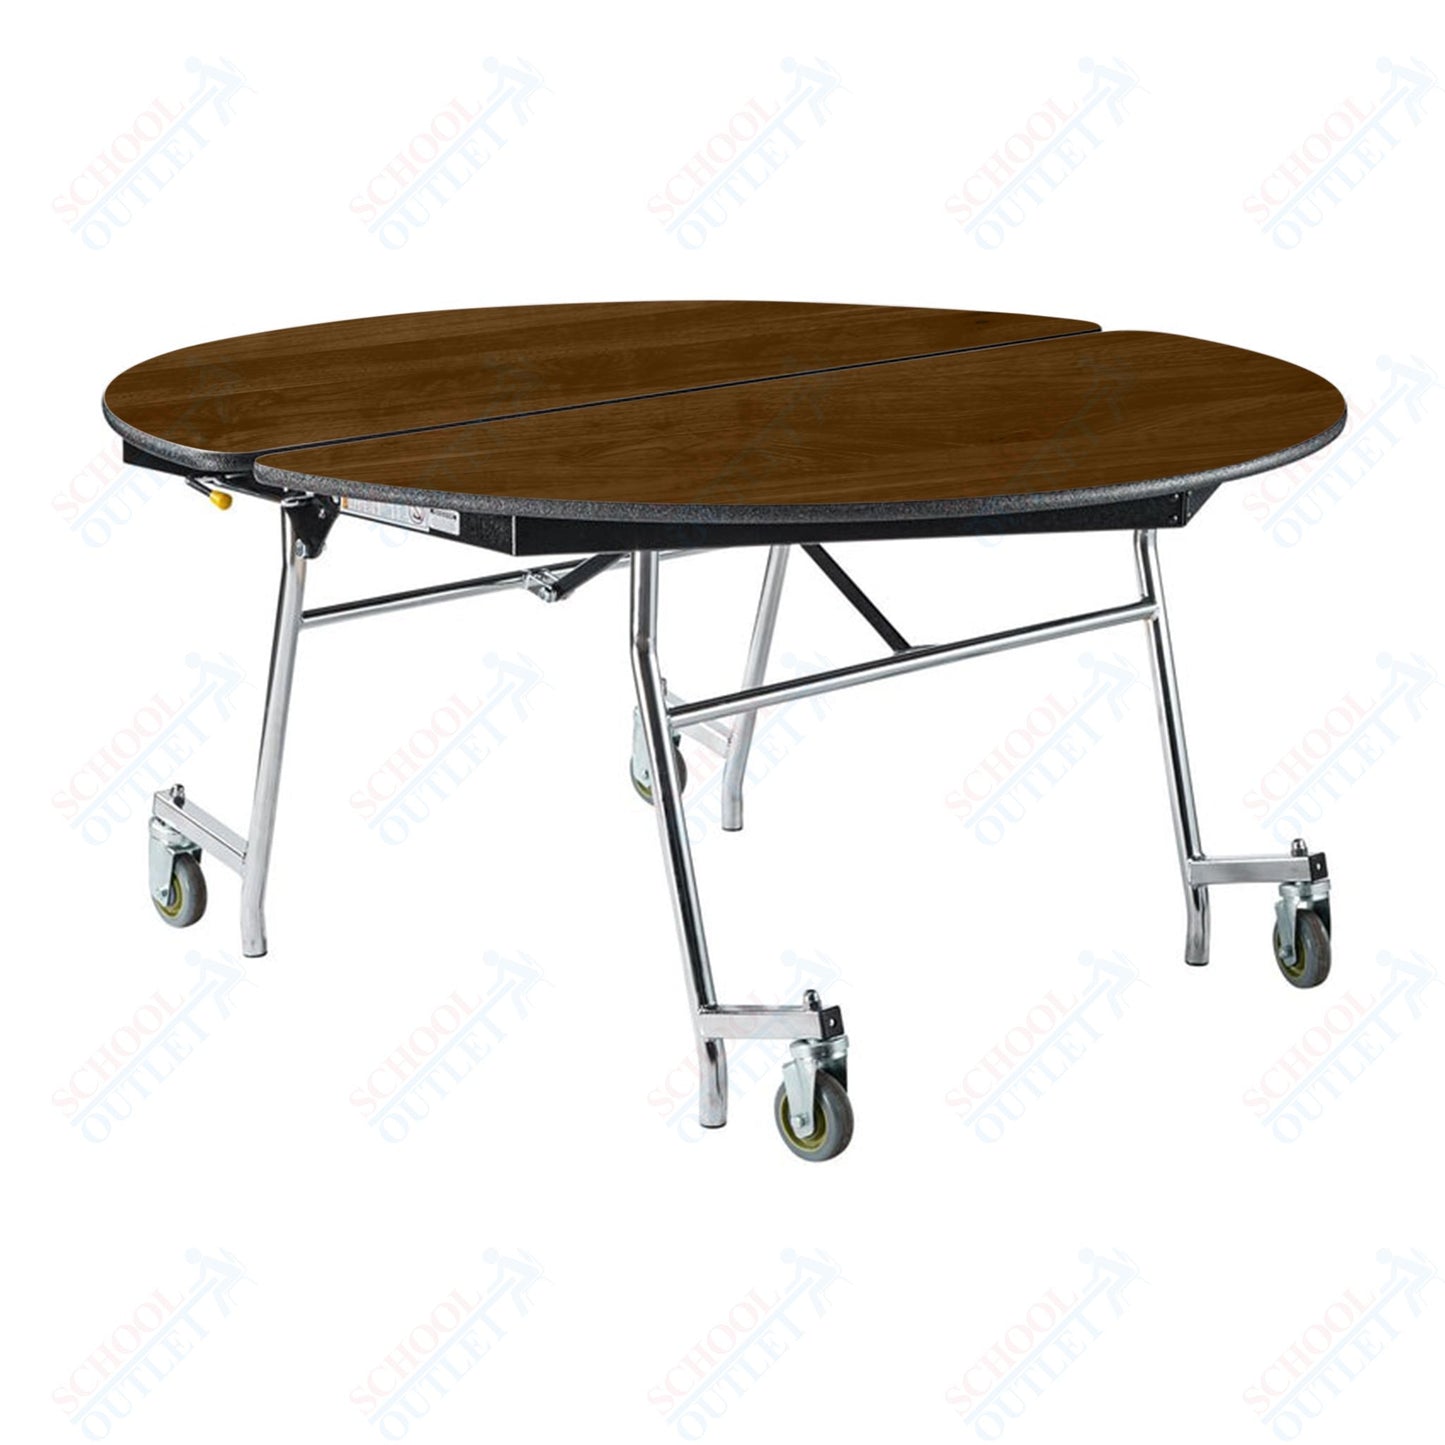 NPS Mobile Cafeteria Round Table Shape Unit - 60" W x 60" L (National Public Seating NPS-MT60R)